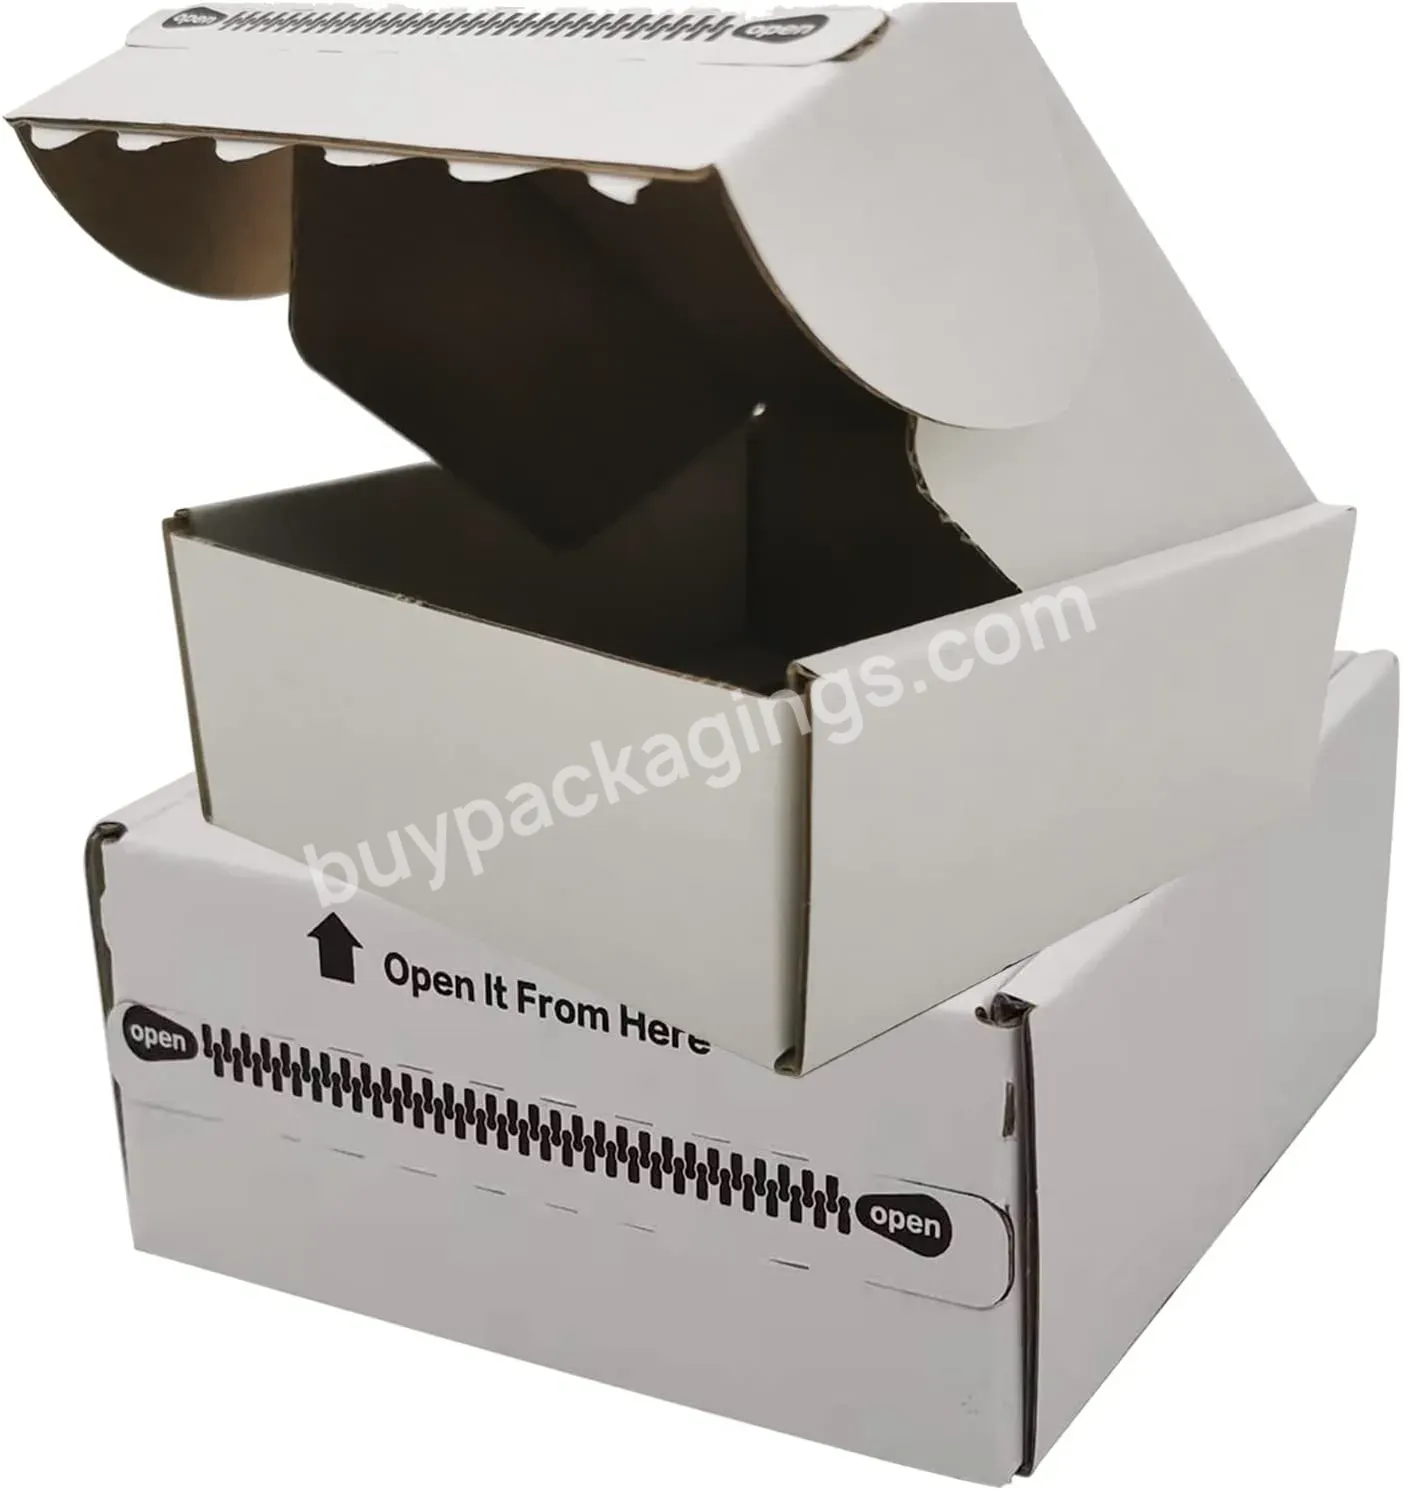 Ecommerce Corrugated Paper Boxes Recycled Cardboard Zipper Tear Strip Mailer Packaging Shipping Box Custom Logo - Buy Shipping Boxes Custom Logo,Zipper Mailing Box,Custom Mailer Boxes With Logo.